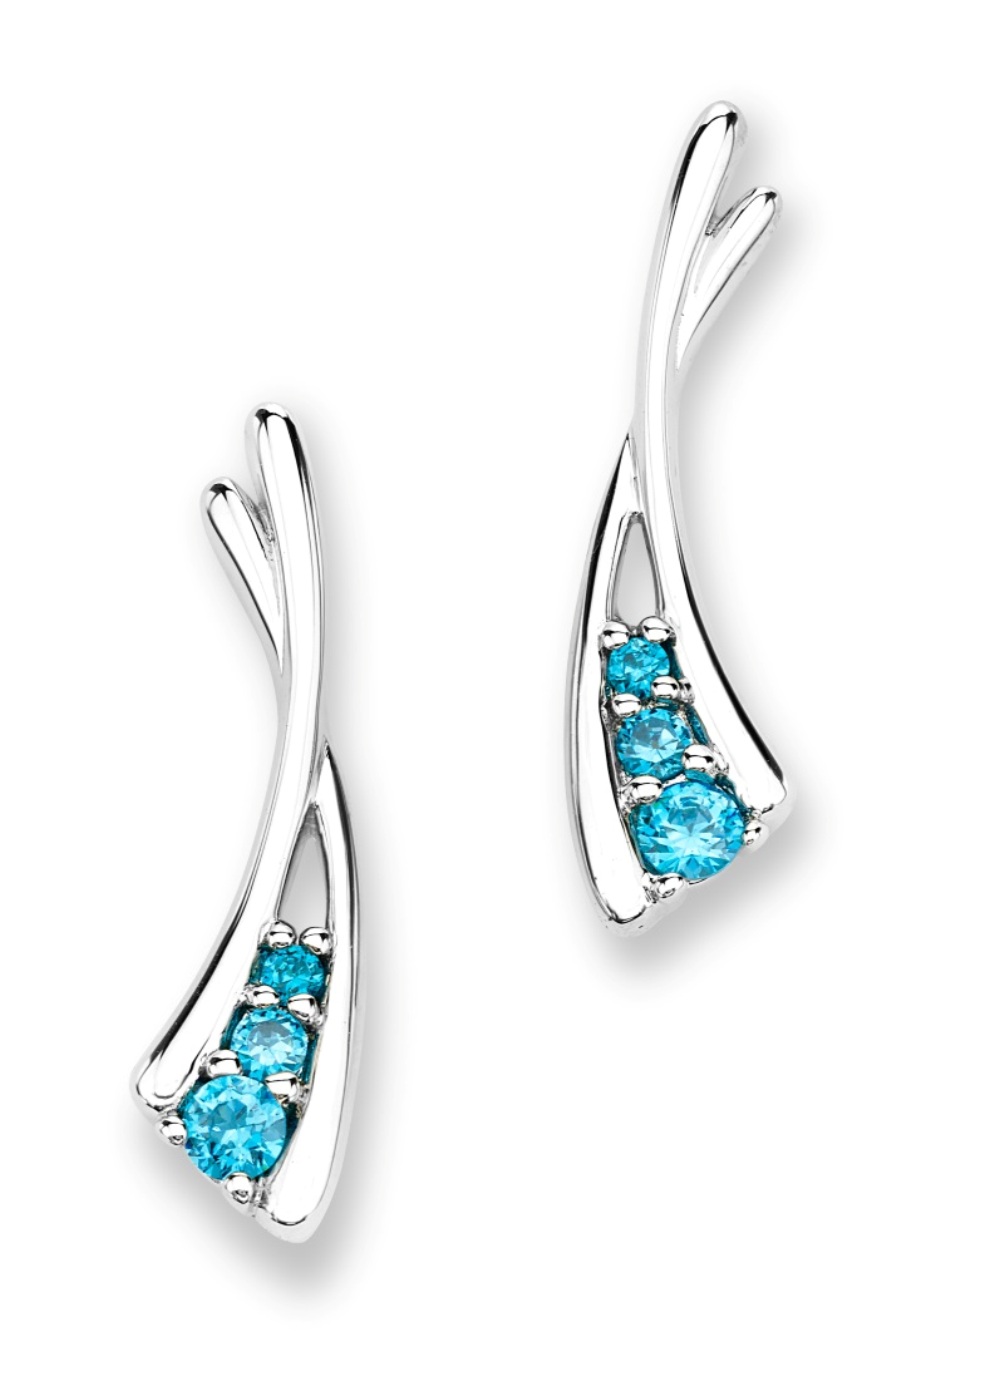 Graduated Blue Topaz CZ Crossover Post Earrings, Rhodium Plated Sterling Silver